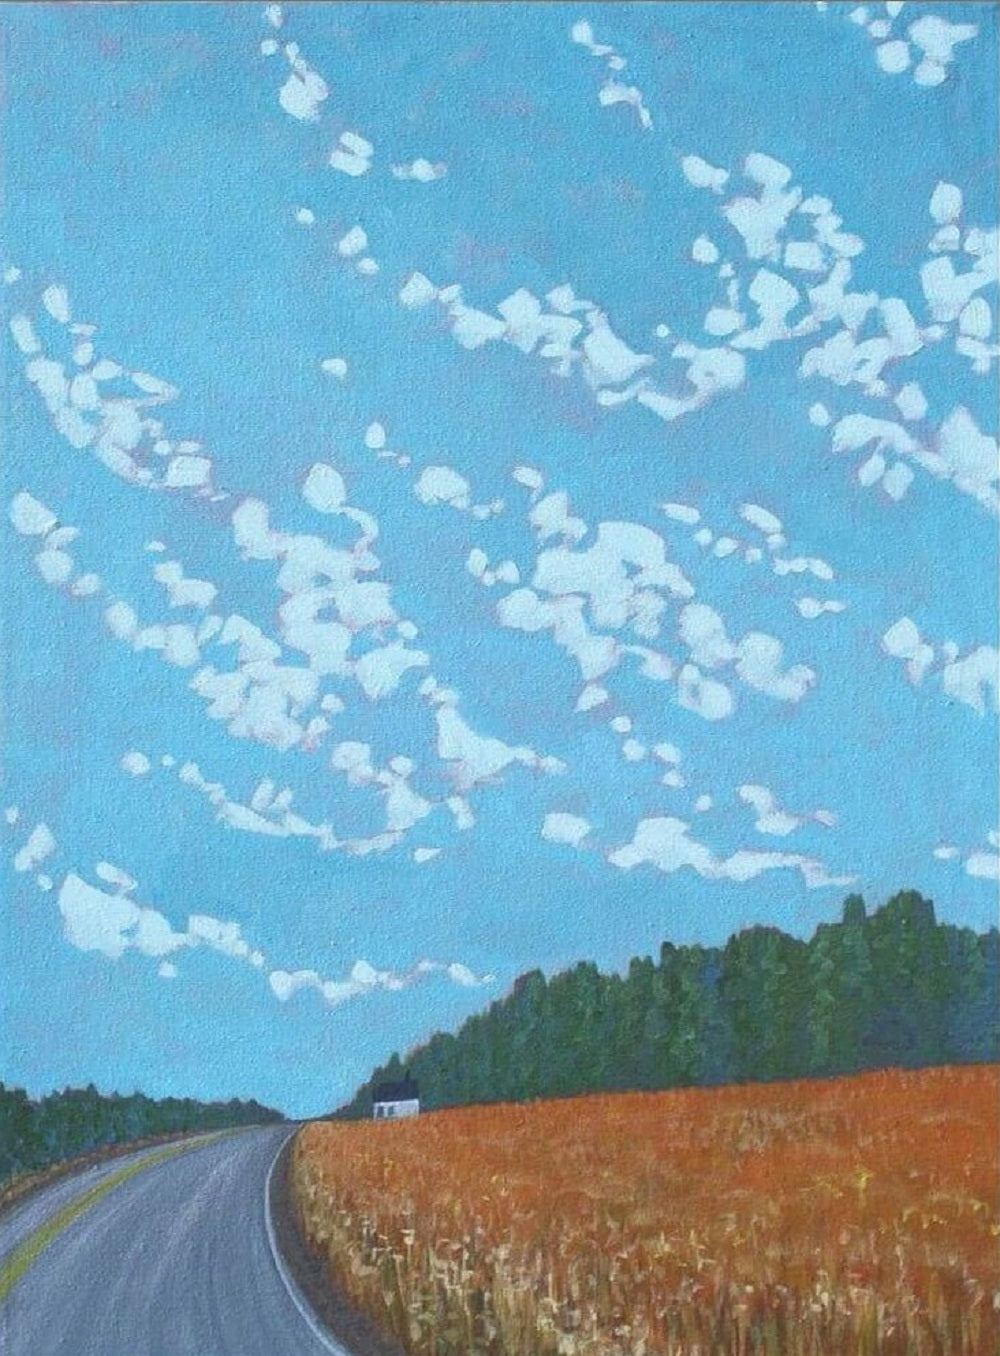 Painting of a rural Canadian town with a vast blue sky and clouds.